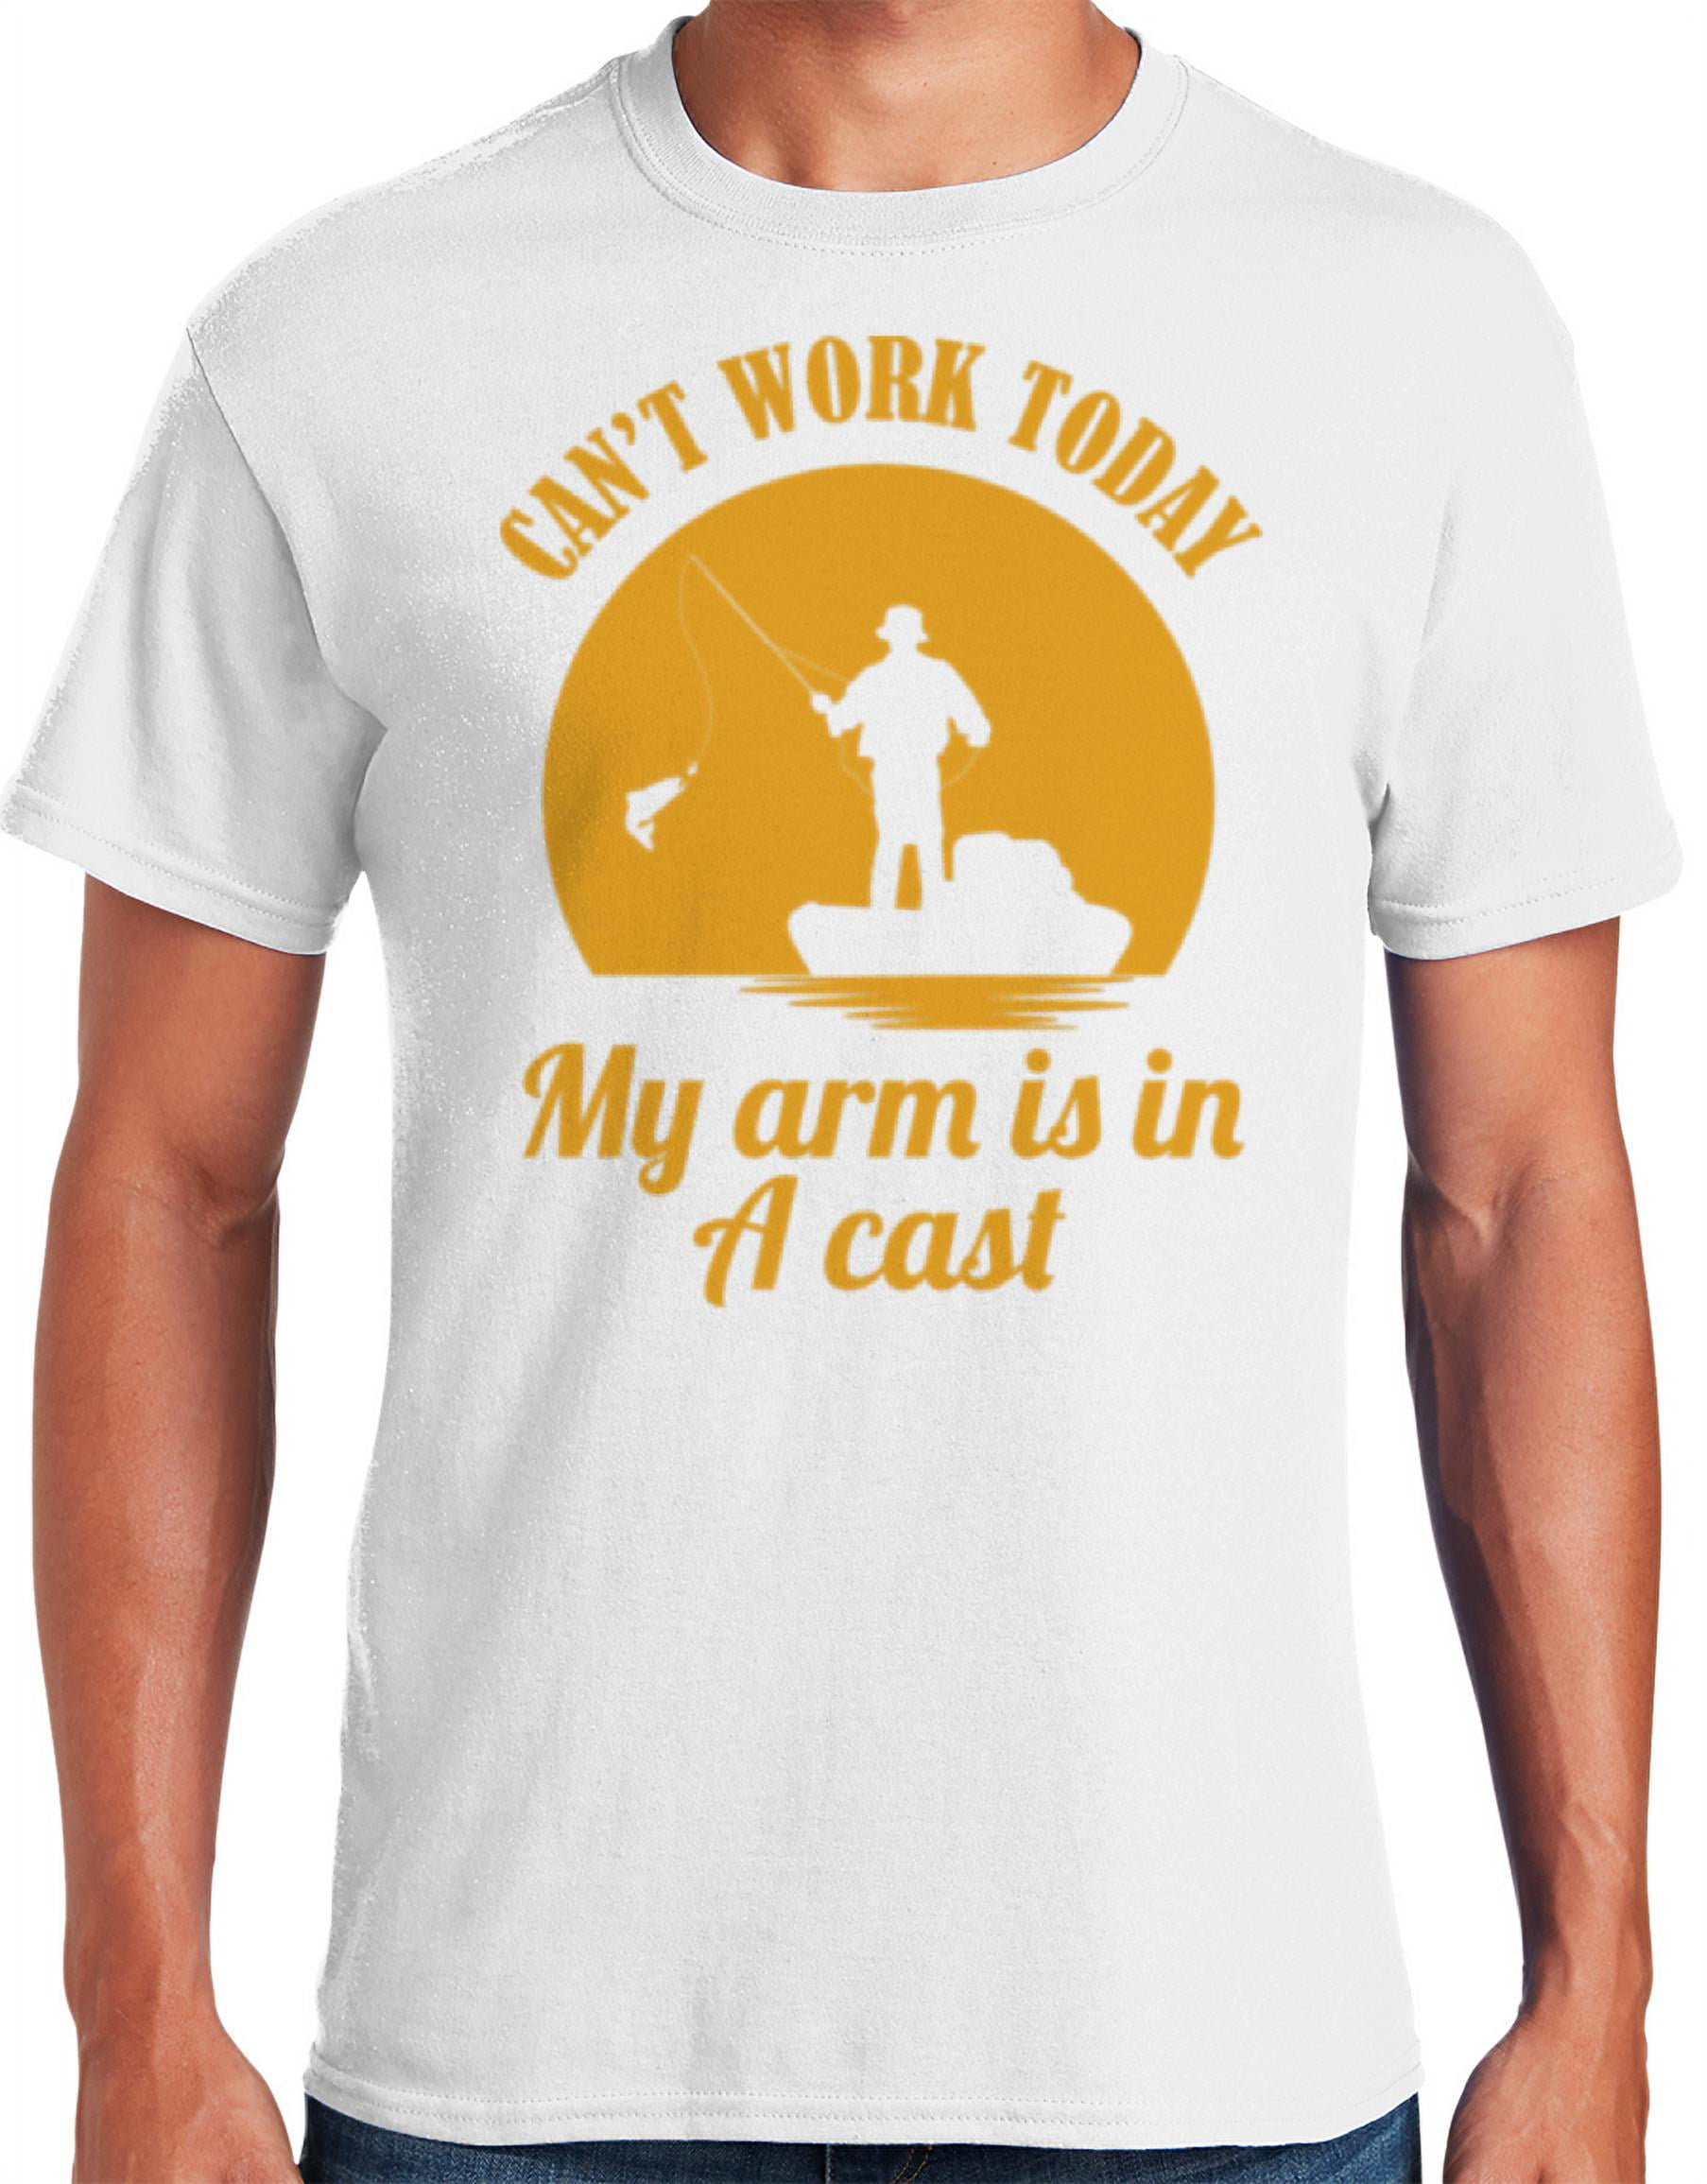  Can't Work Today My Arm is in A Cast - Funny Fly Fishing T-Shirt  : Clothing, Shoes & Jewelry